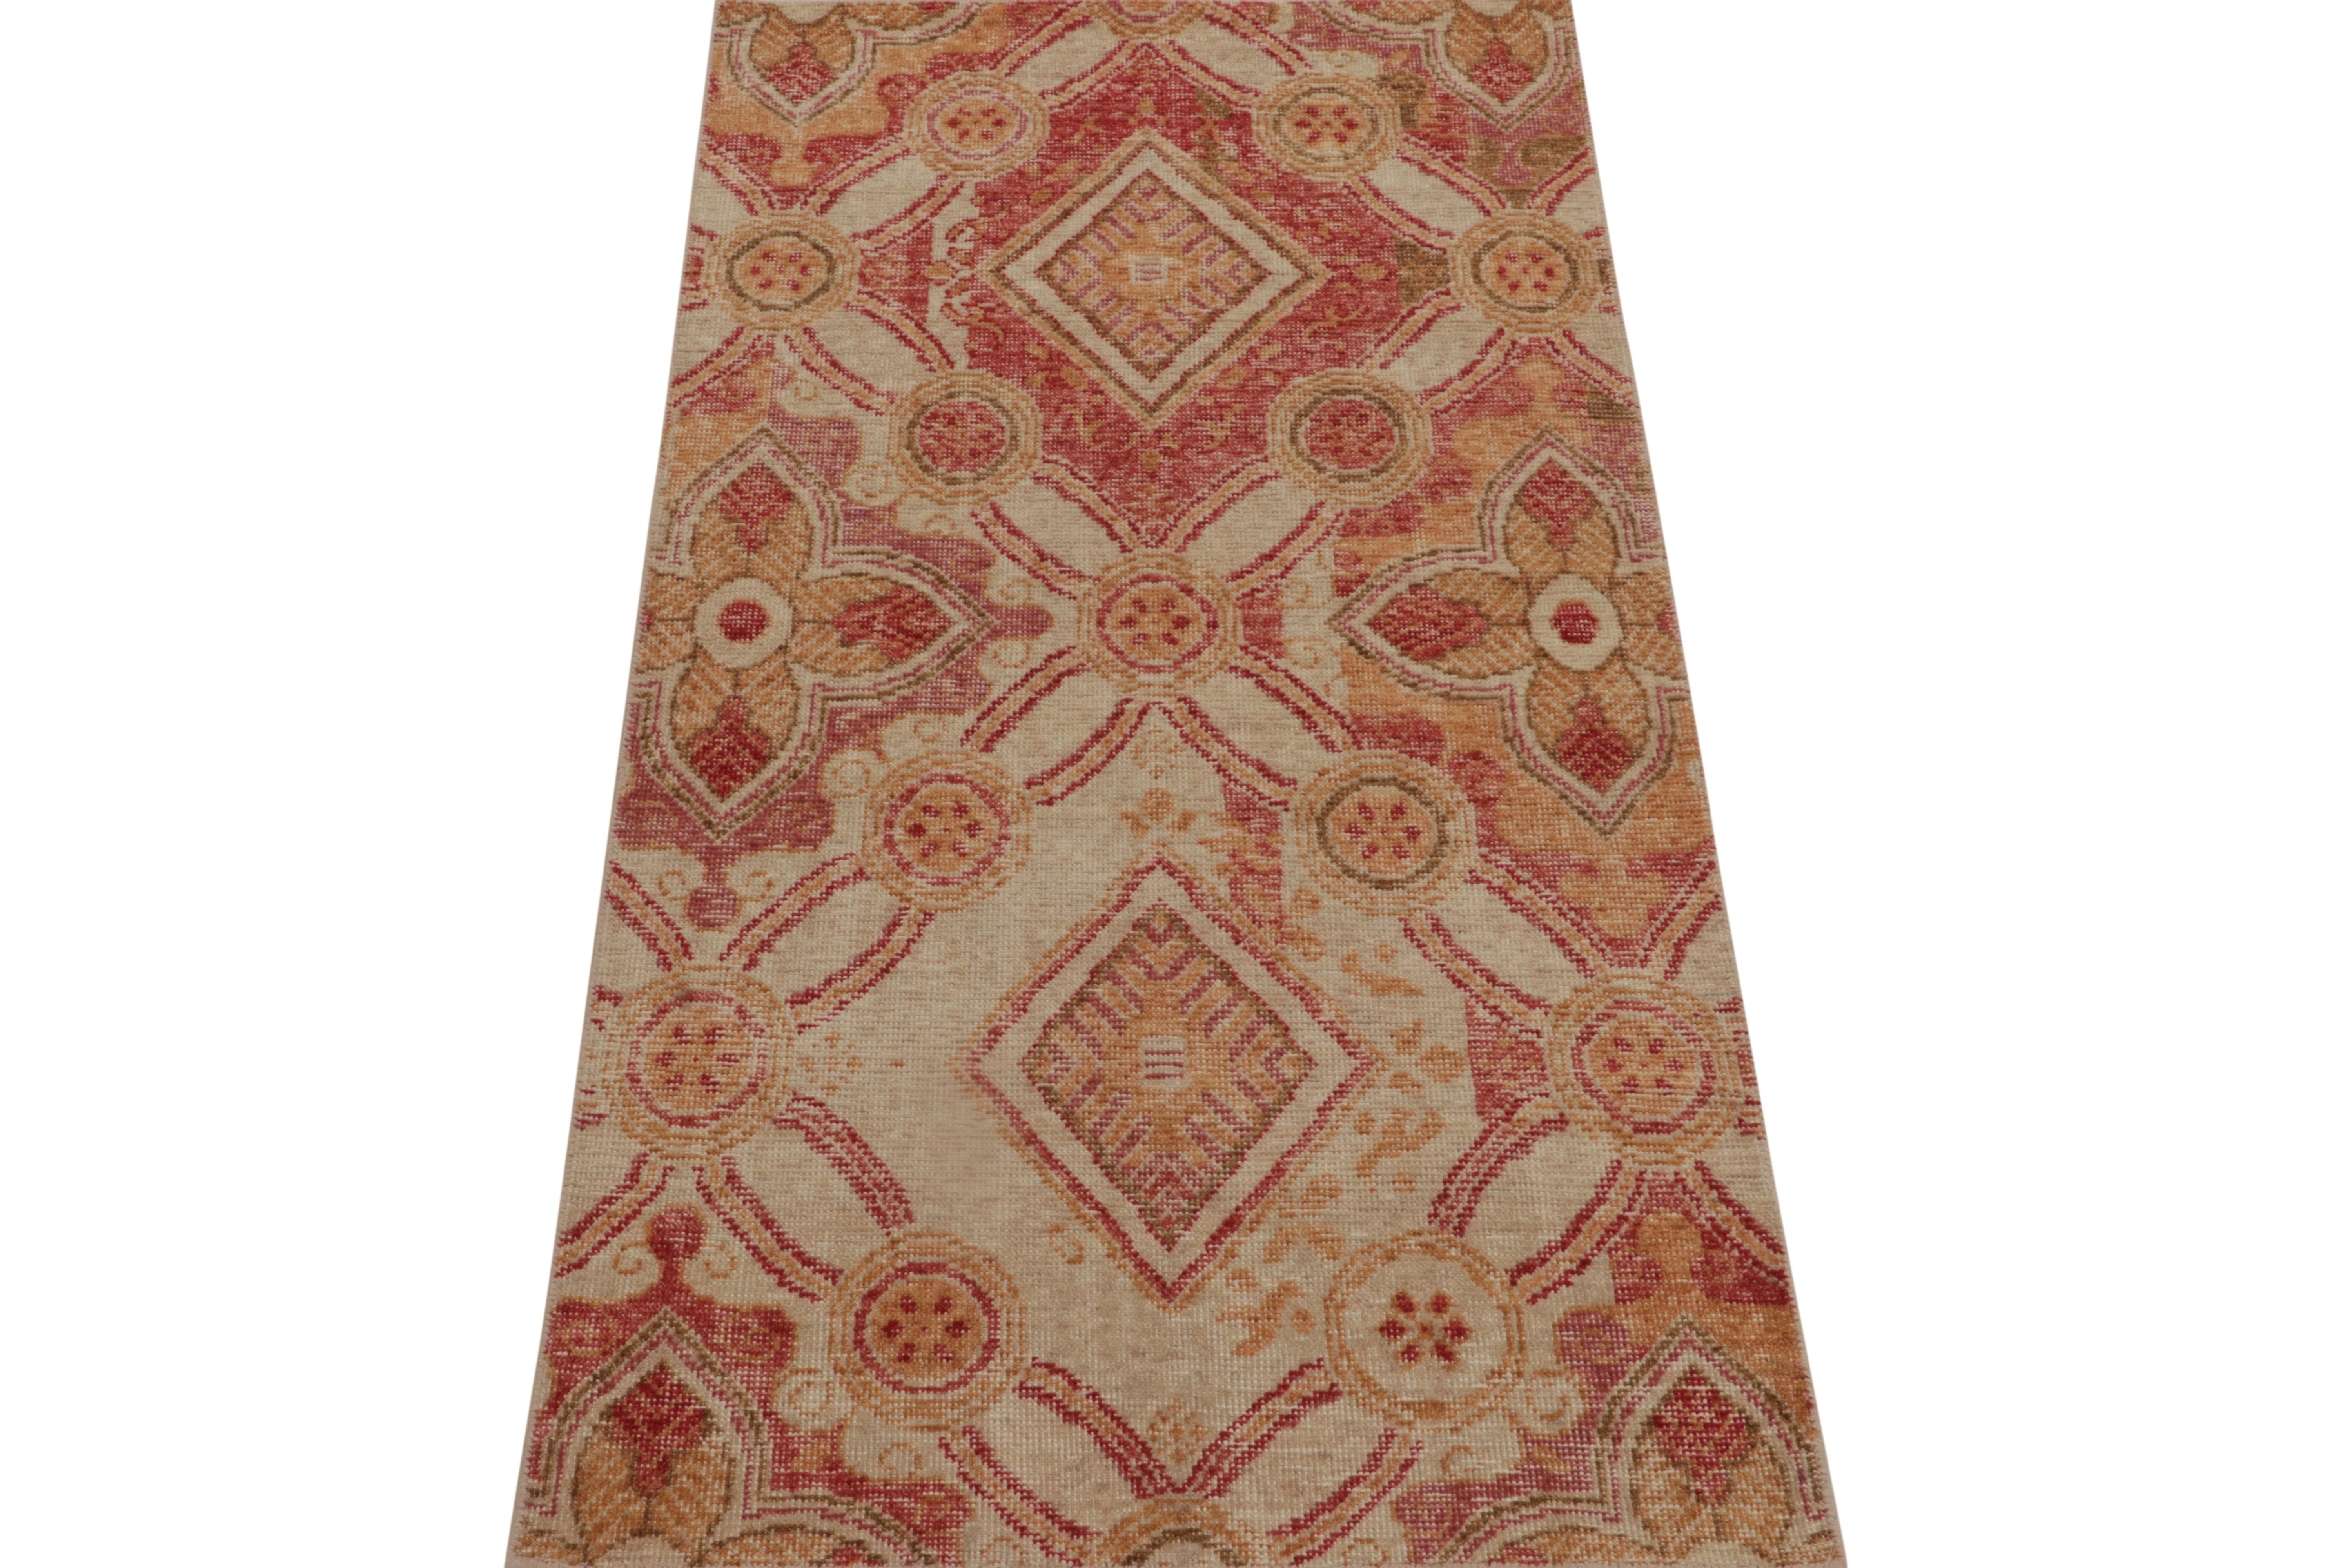 Indian Rug & Kilim’s Distressed Style Runner in Red, Gold and Beige-Brown Trellises For Sale